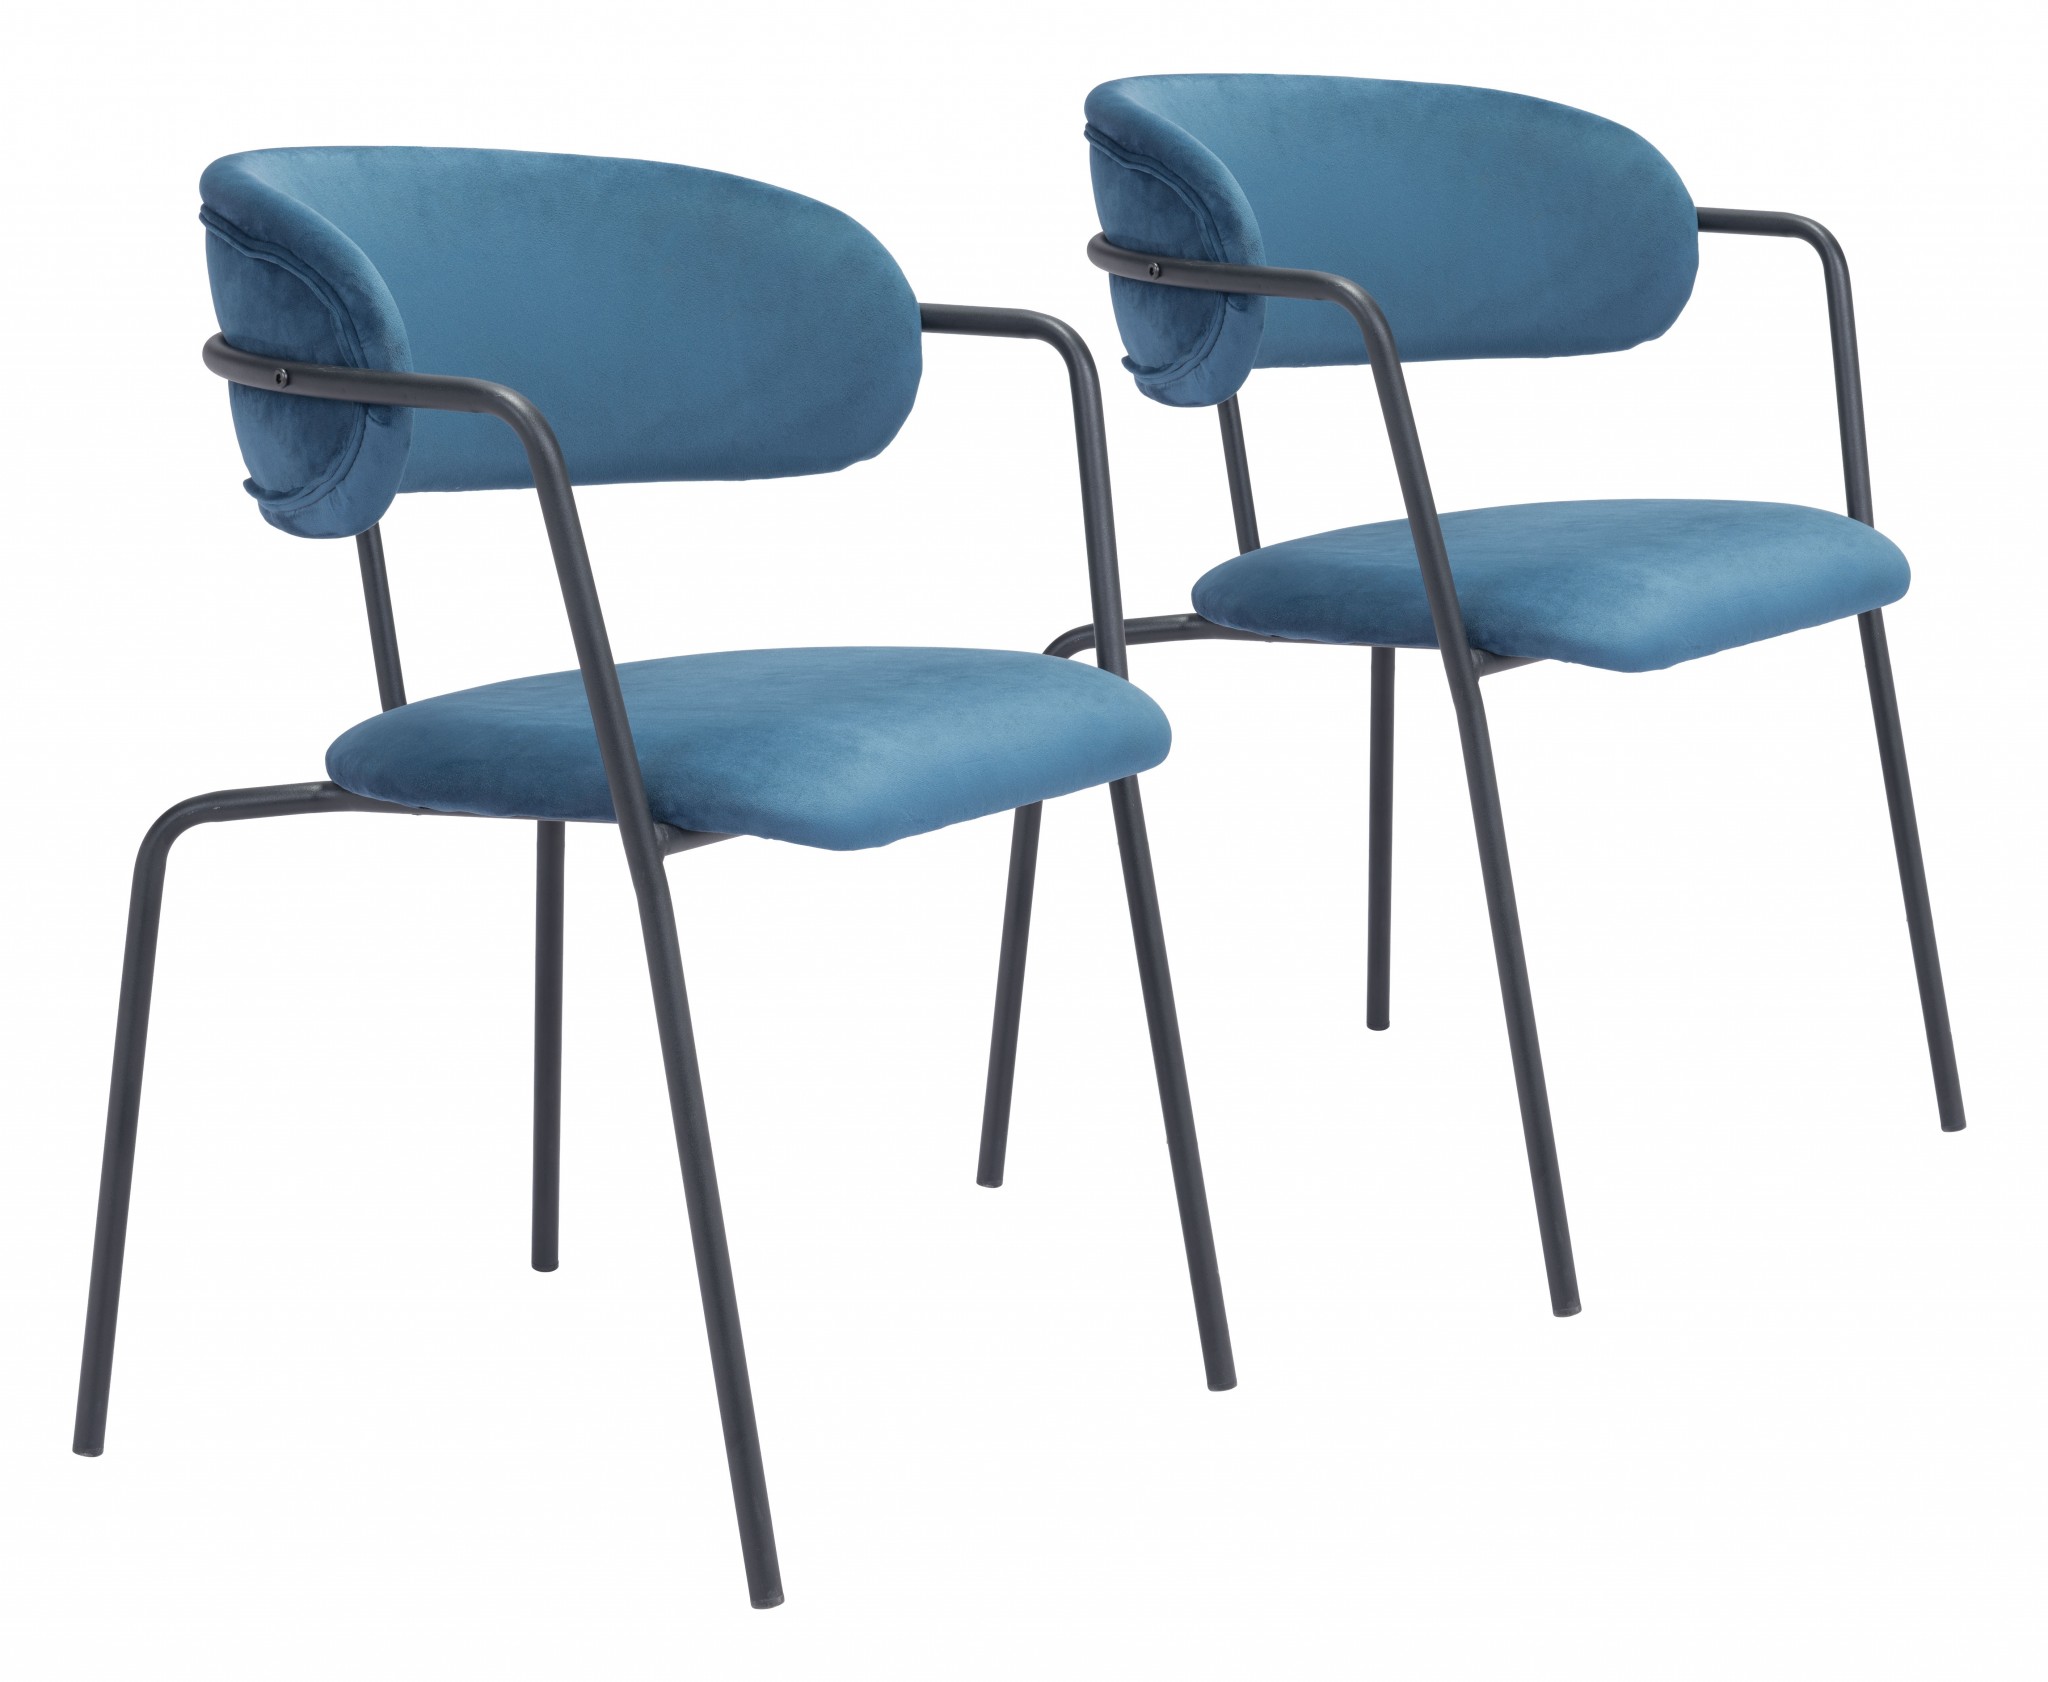 Set of Two Blue and Gunmetal Modern Industrial Dining Chairs